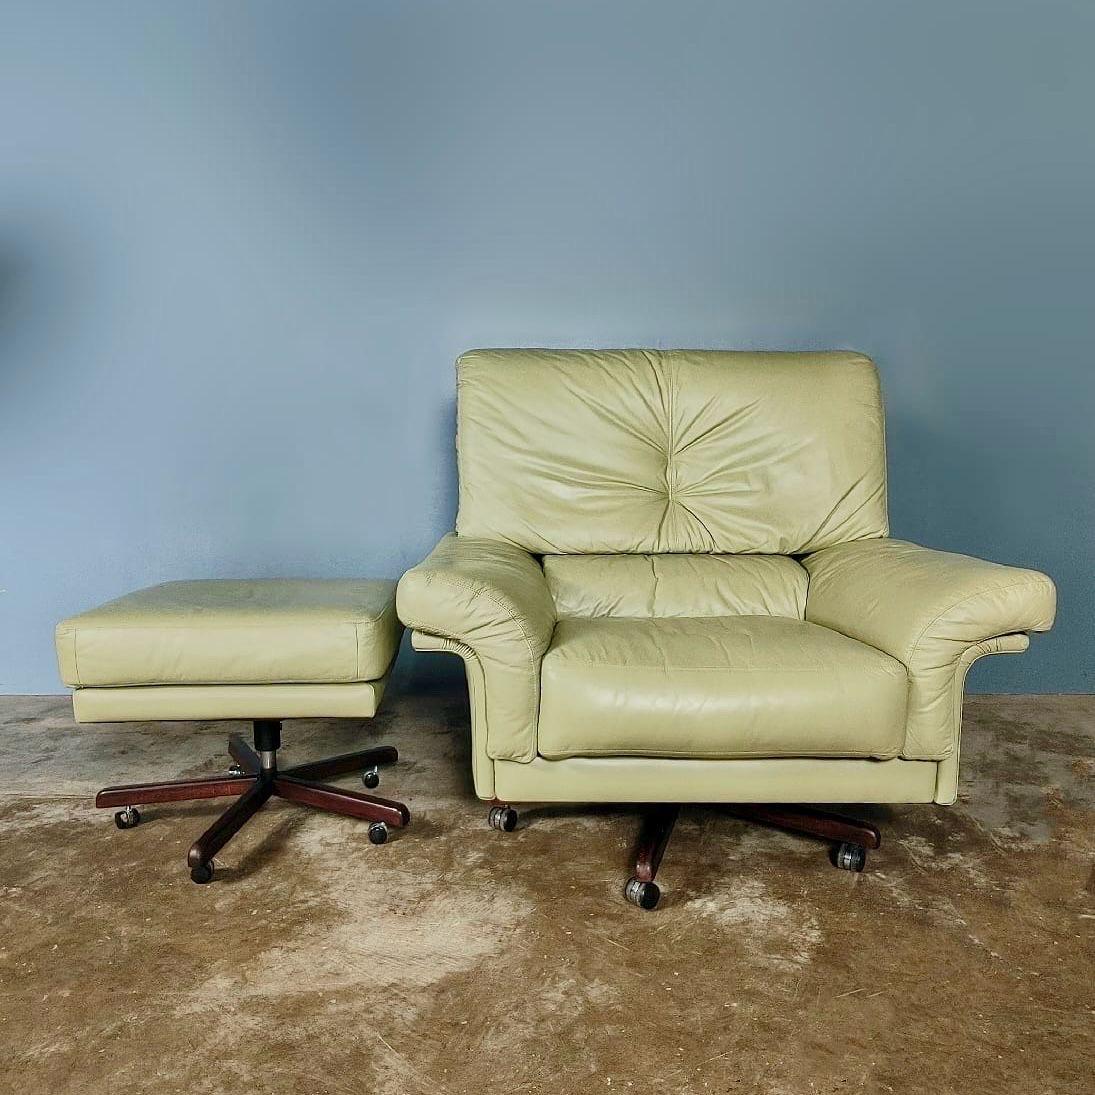 New Stock ✅

Mid Century Vintage Leather Green Leather Swivel and Footstool 1980s Italian Vintage Retro MCM

Beautiful matching swivel arm chair and footstool in high quality mint sage green leather. We believe these items date from the 1980 and